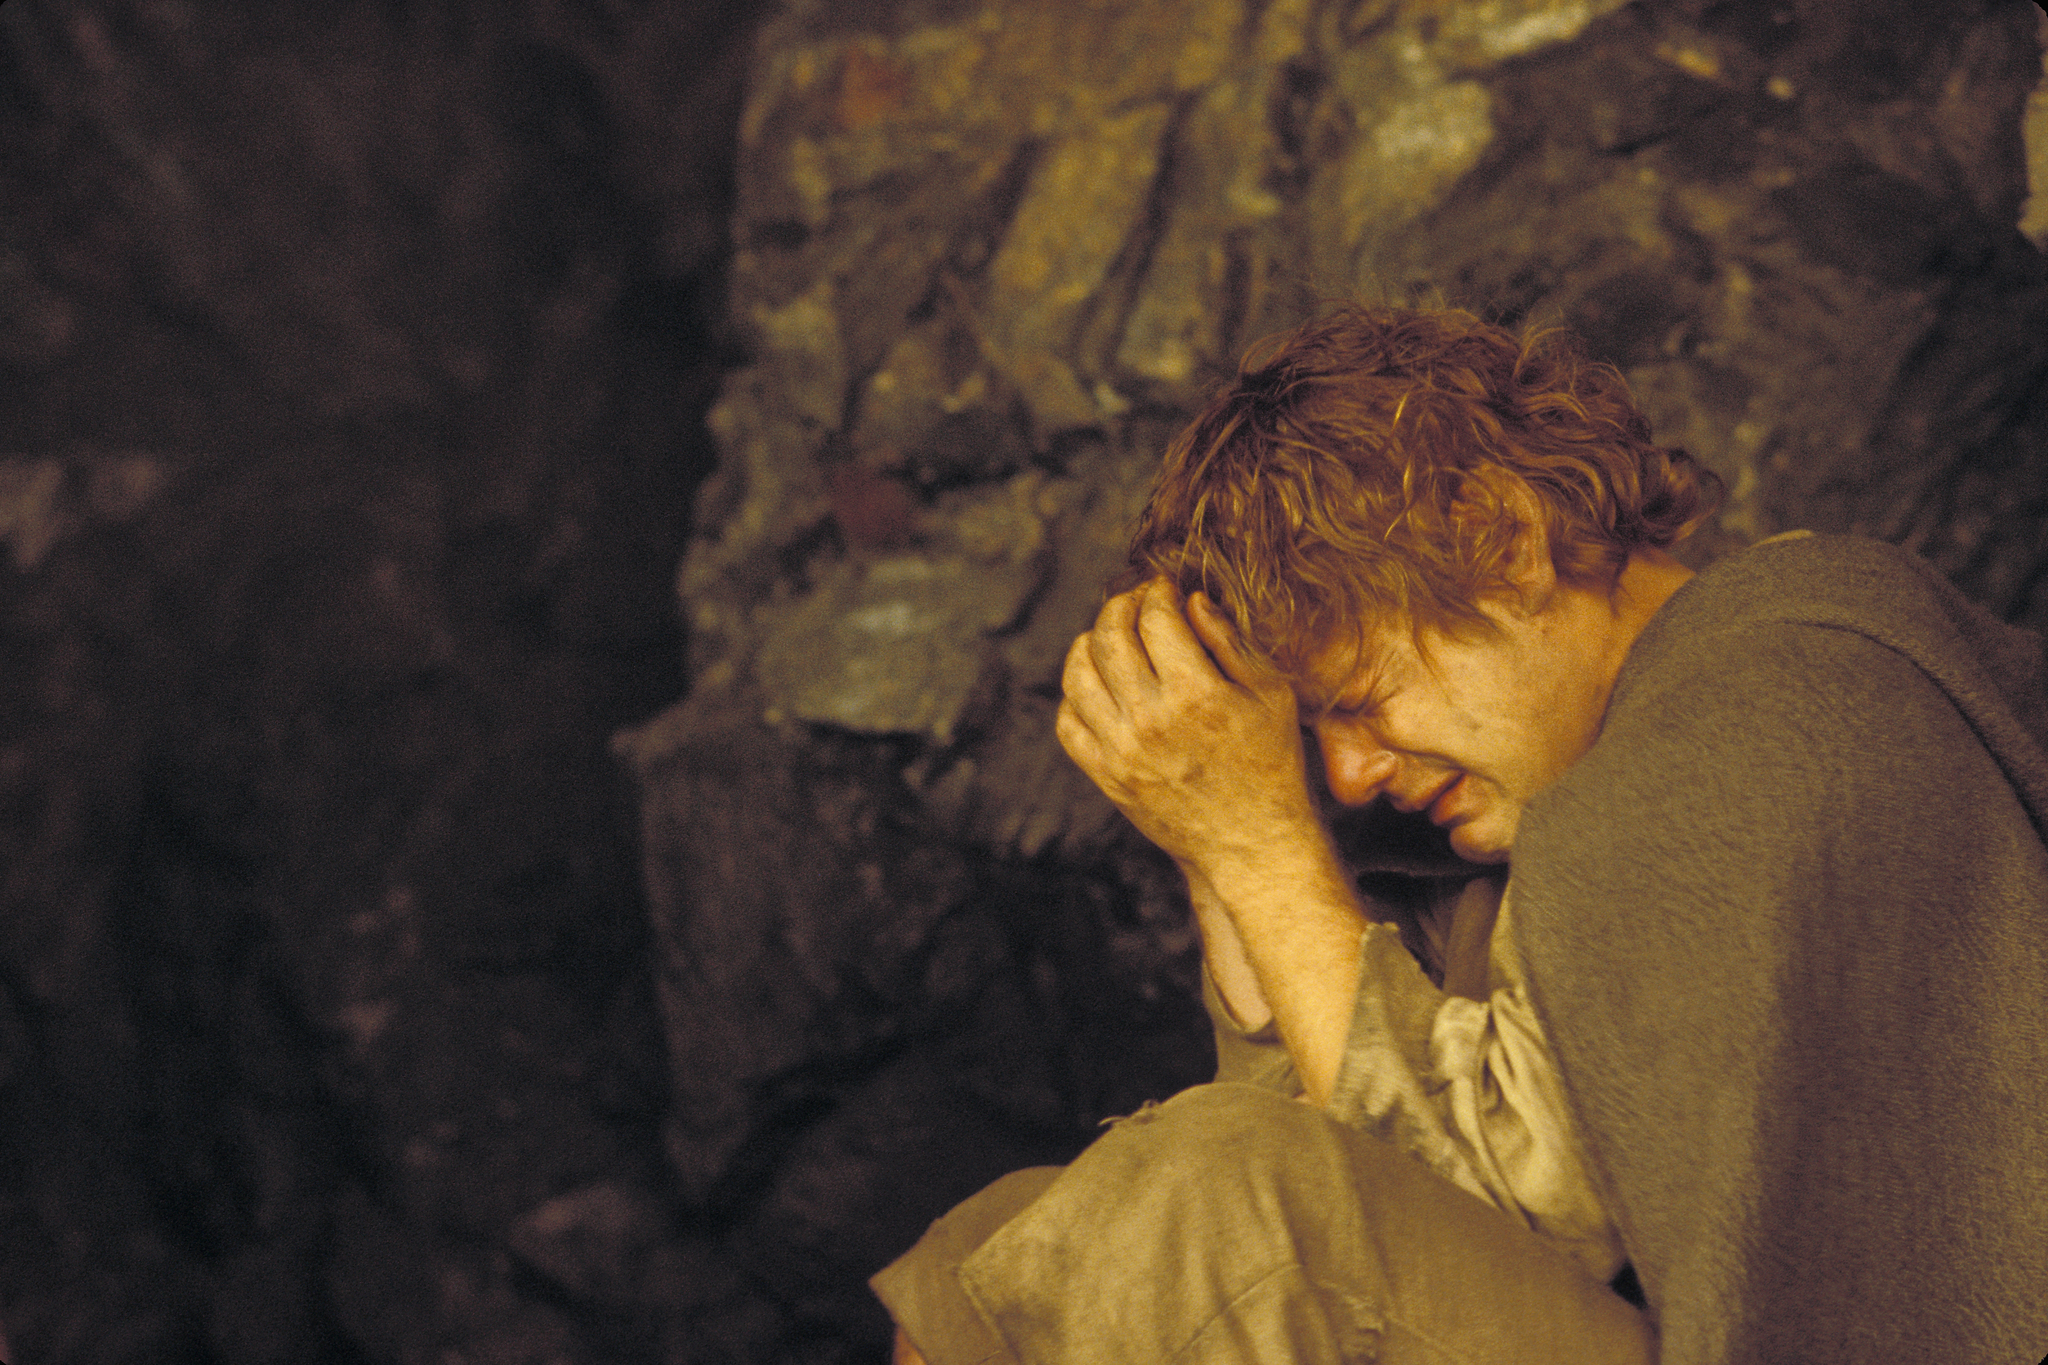 Sean Astin in The Lord of the Rings: The Return of the King (2003)